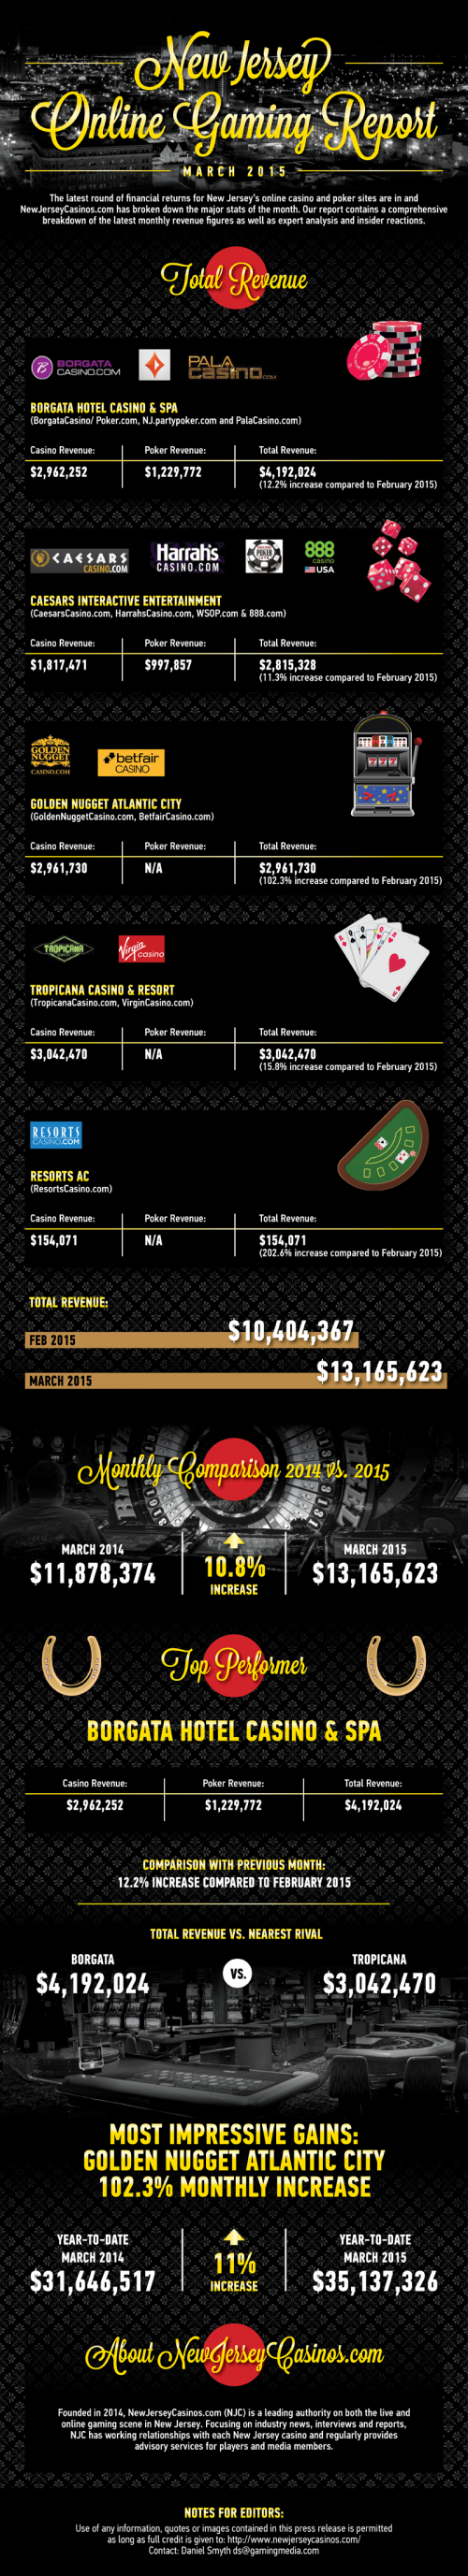 New Jersey Online Gaming Revenue Report March 2015'